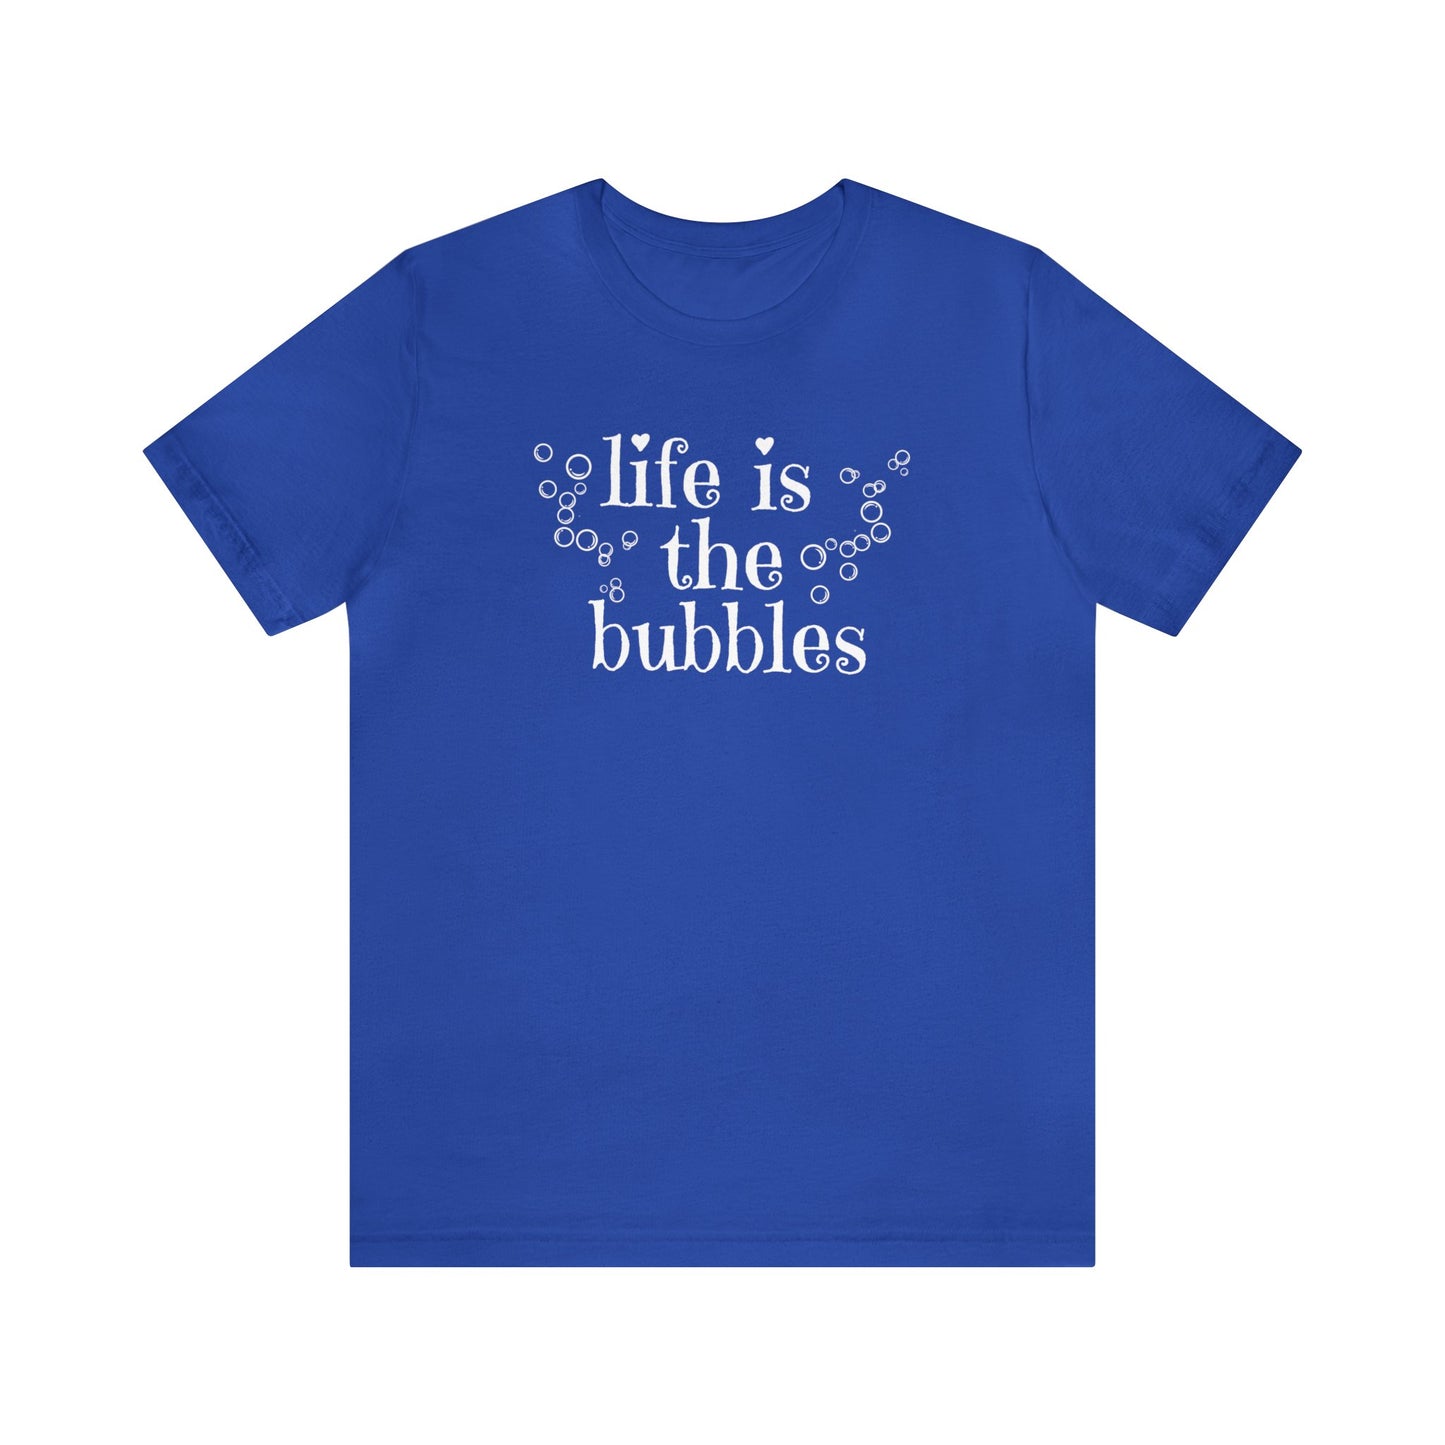 Adult Crew Neck Life is the Bubbles